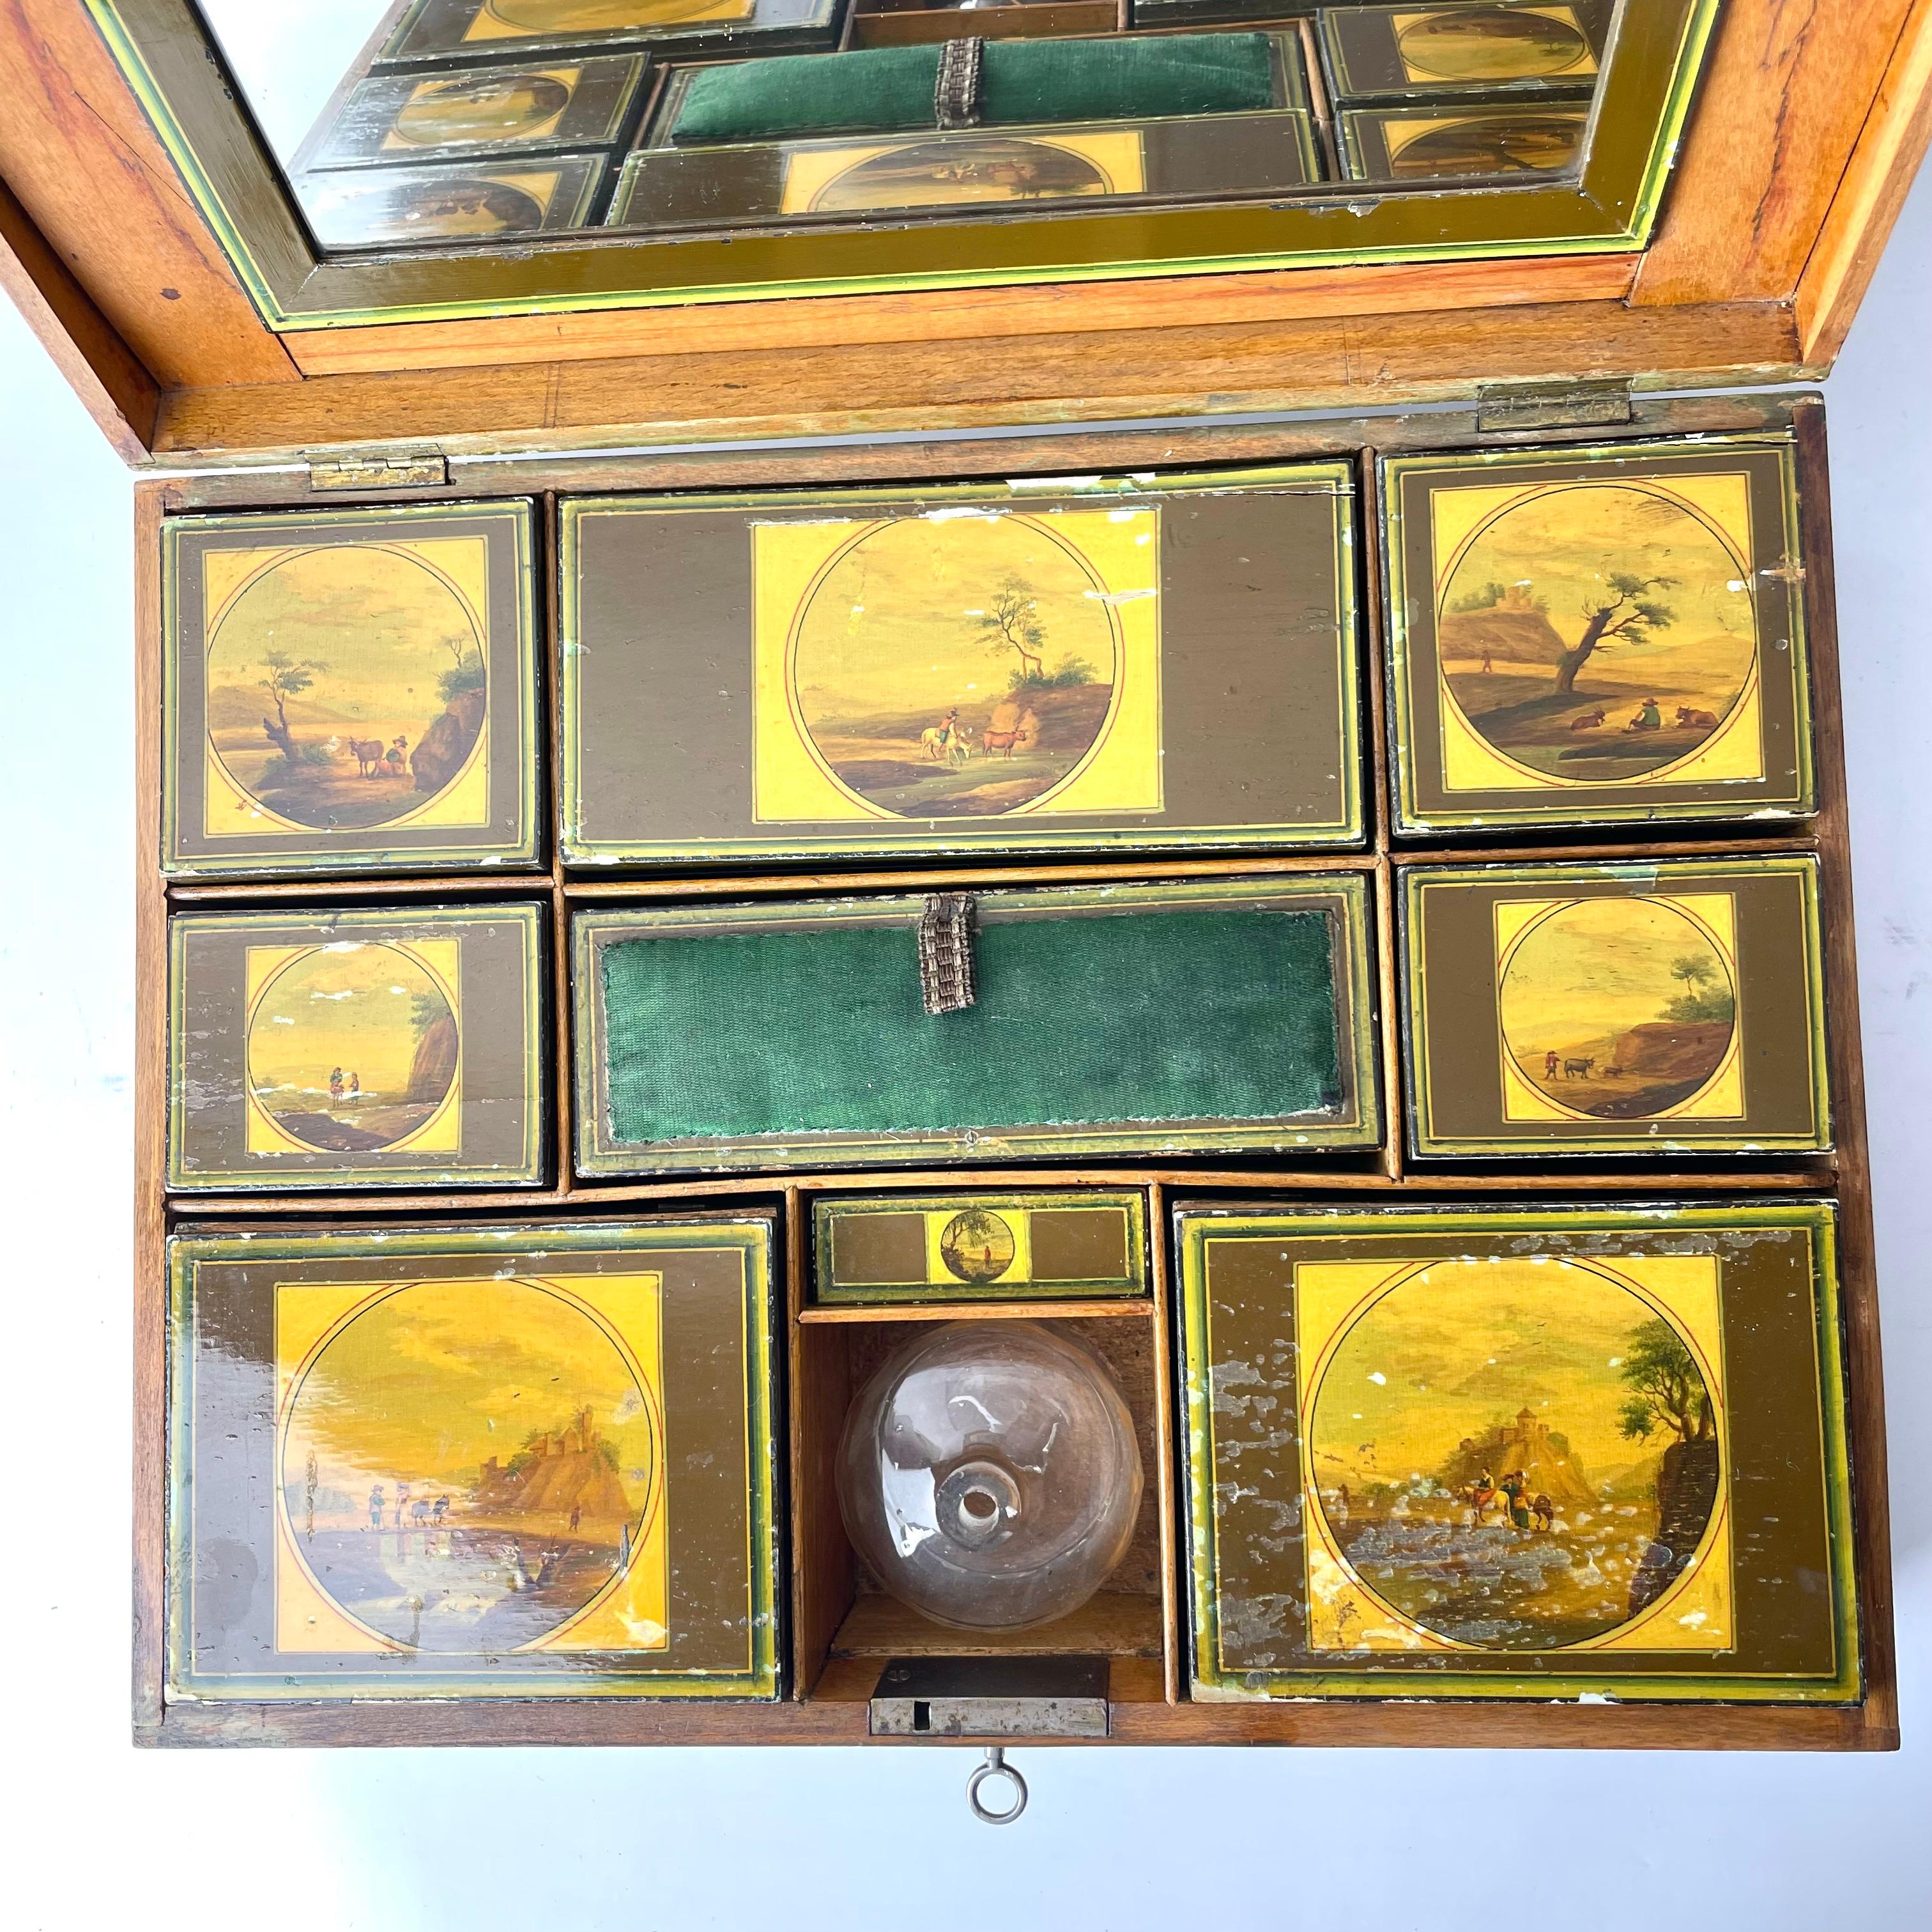 Large Sewing Box Lacquer Work with Pastoral Scenes, Early 19th Century For Sale 3